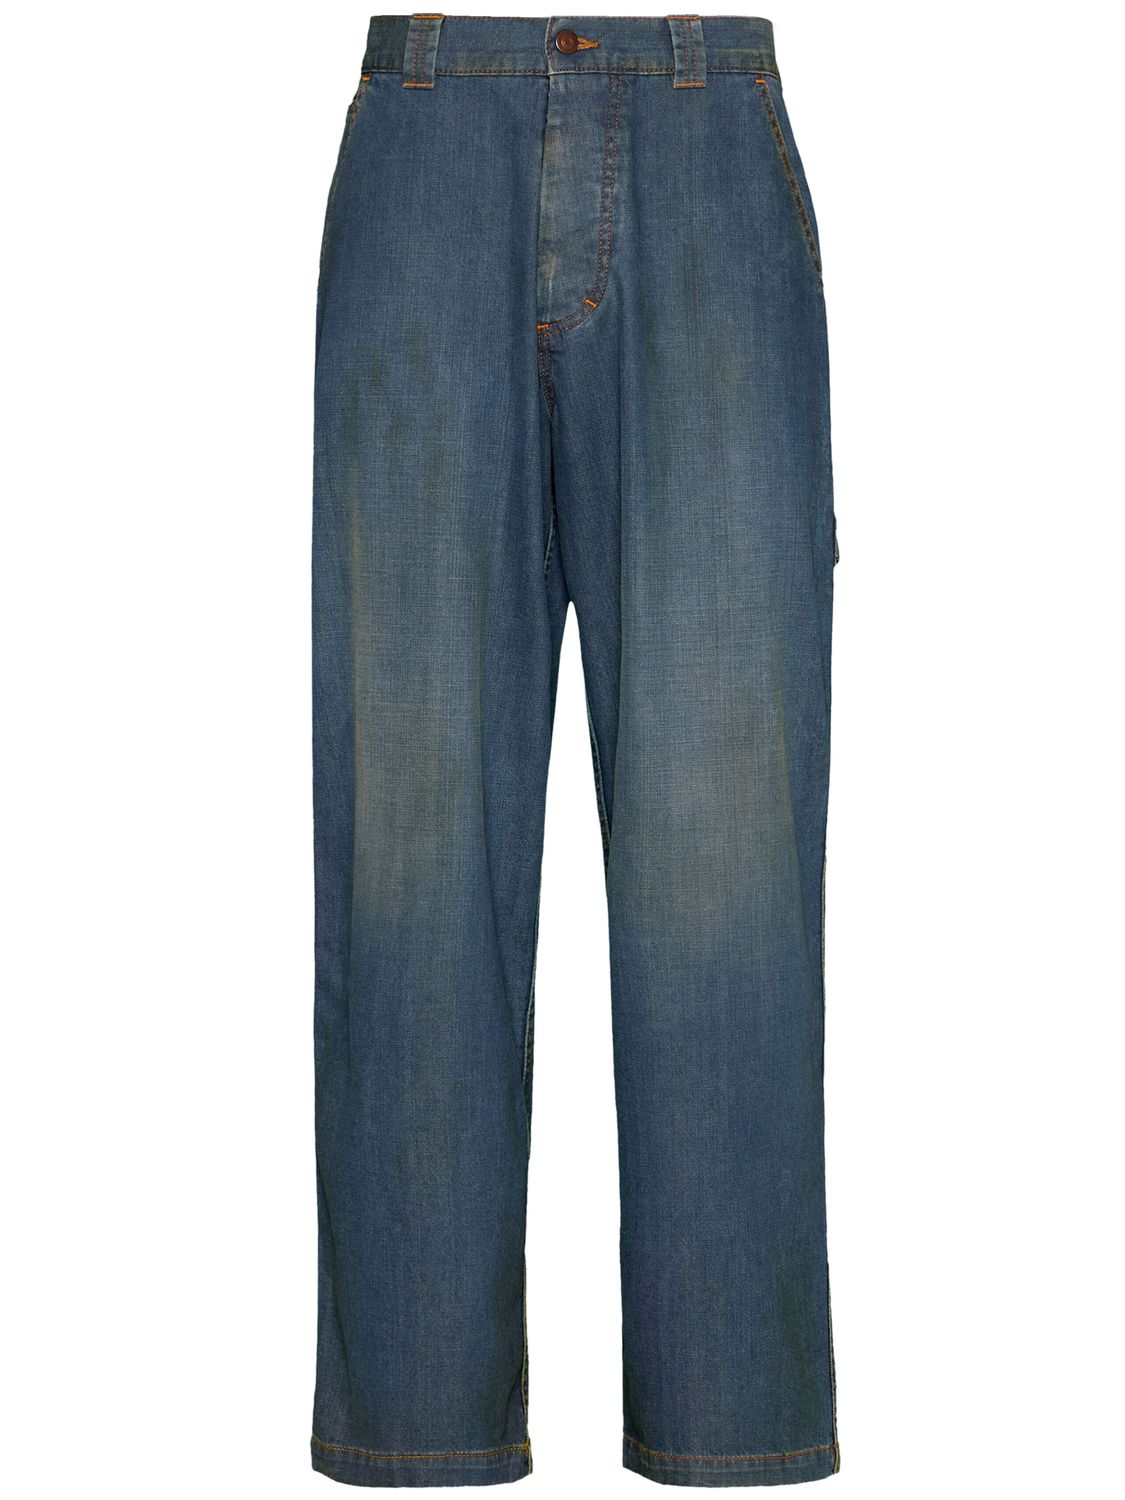 Blue Vintage Americana Wash Relaxed Fit Jeans